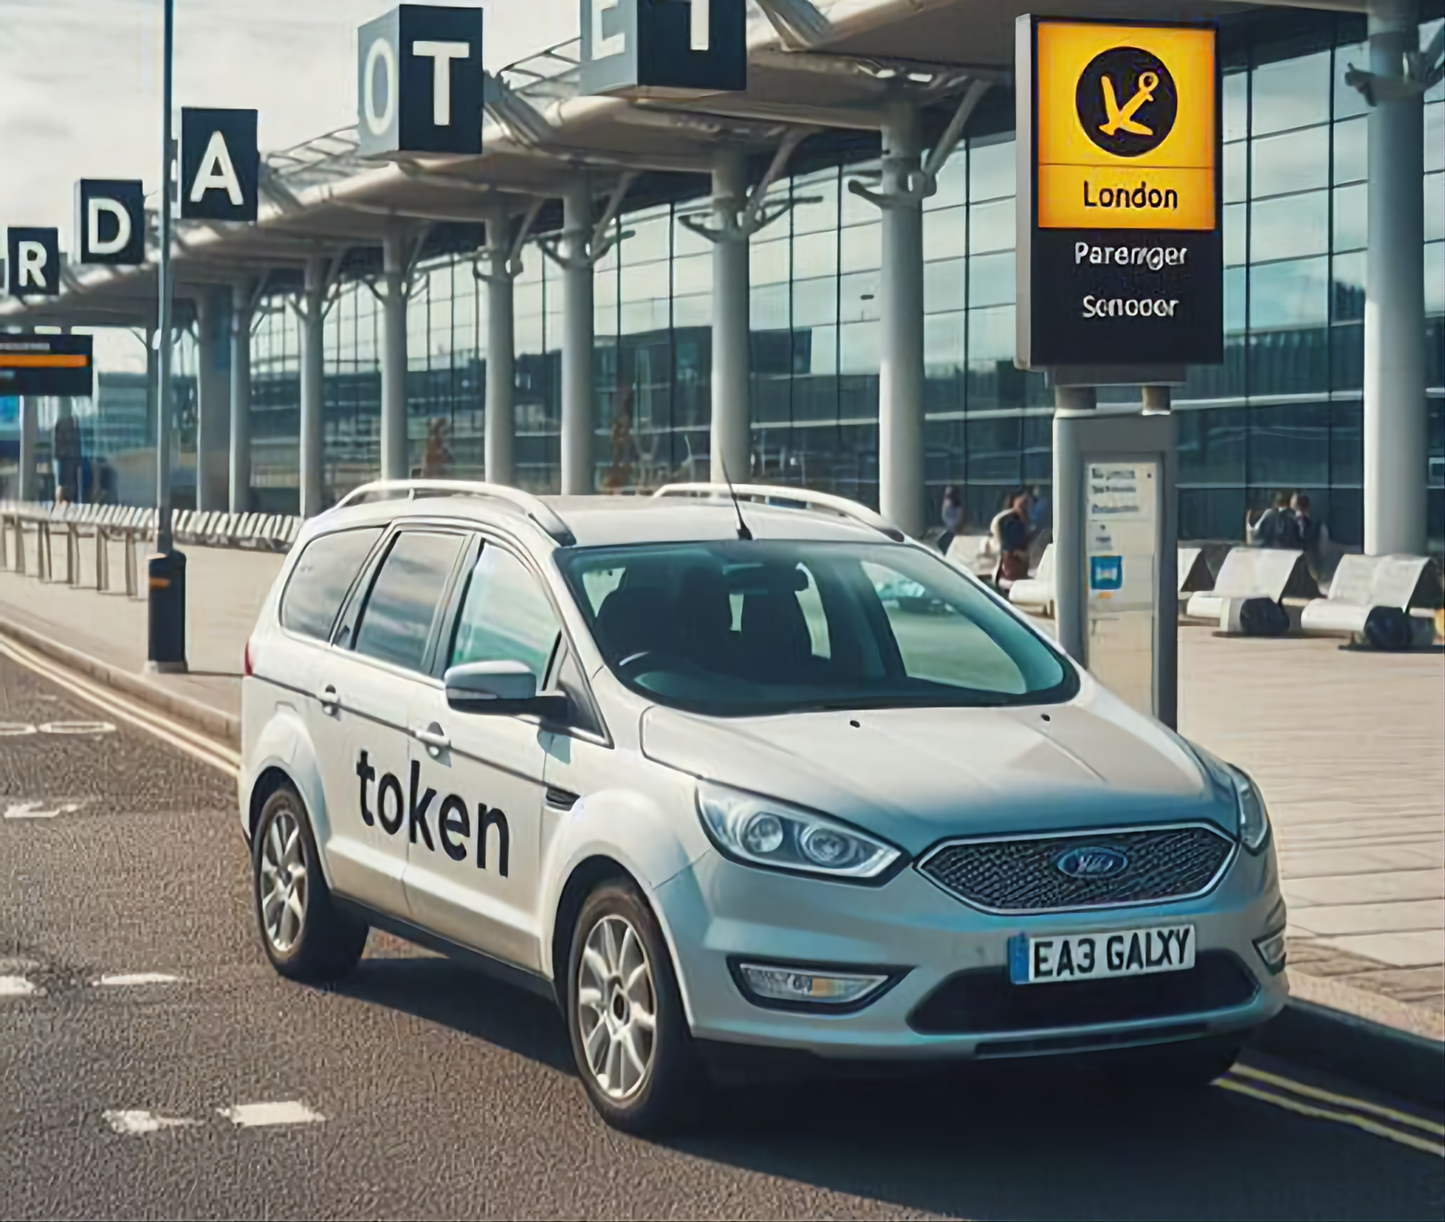 Any London Airport Token: Drop-Off